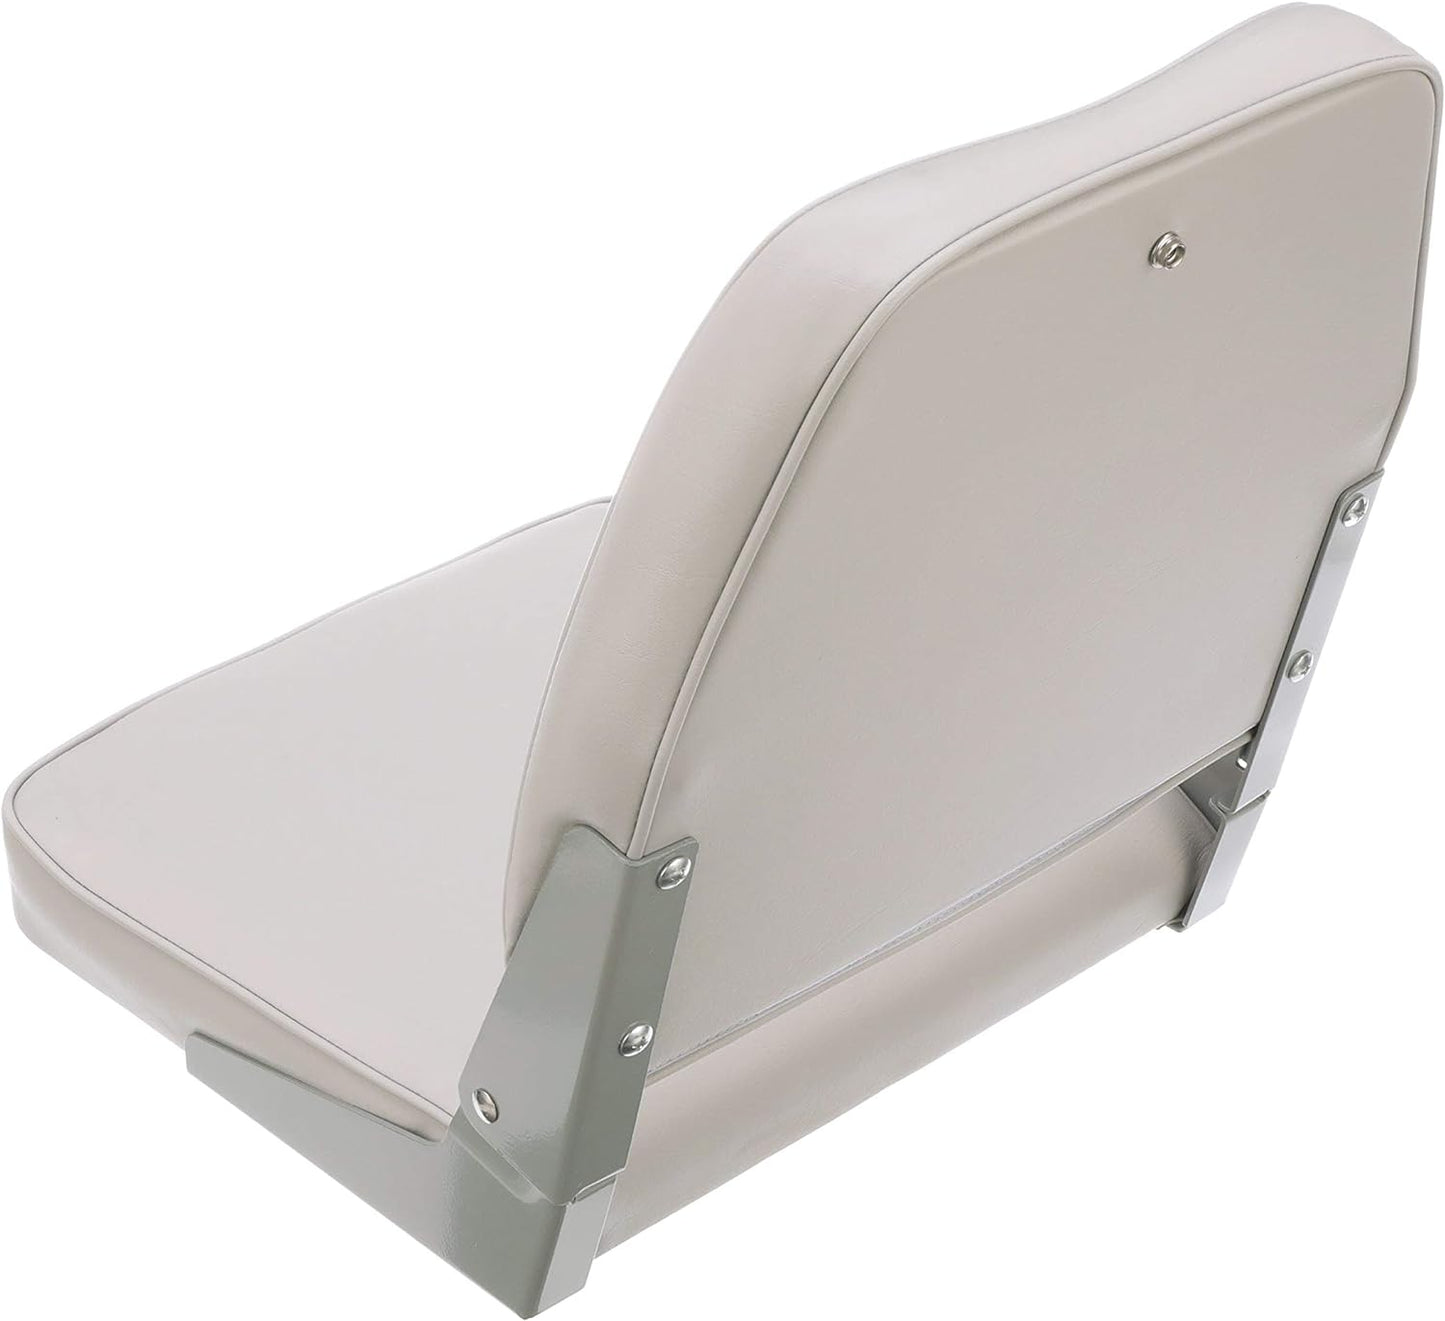 Attwood Low-Back Padded Boat Seats